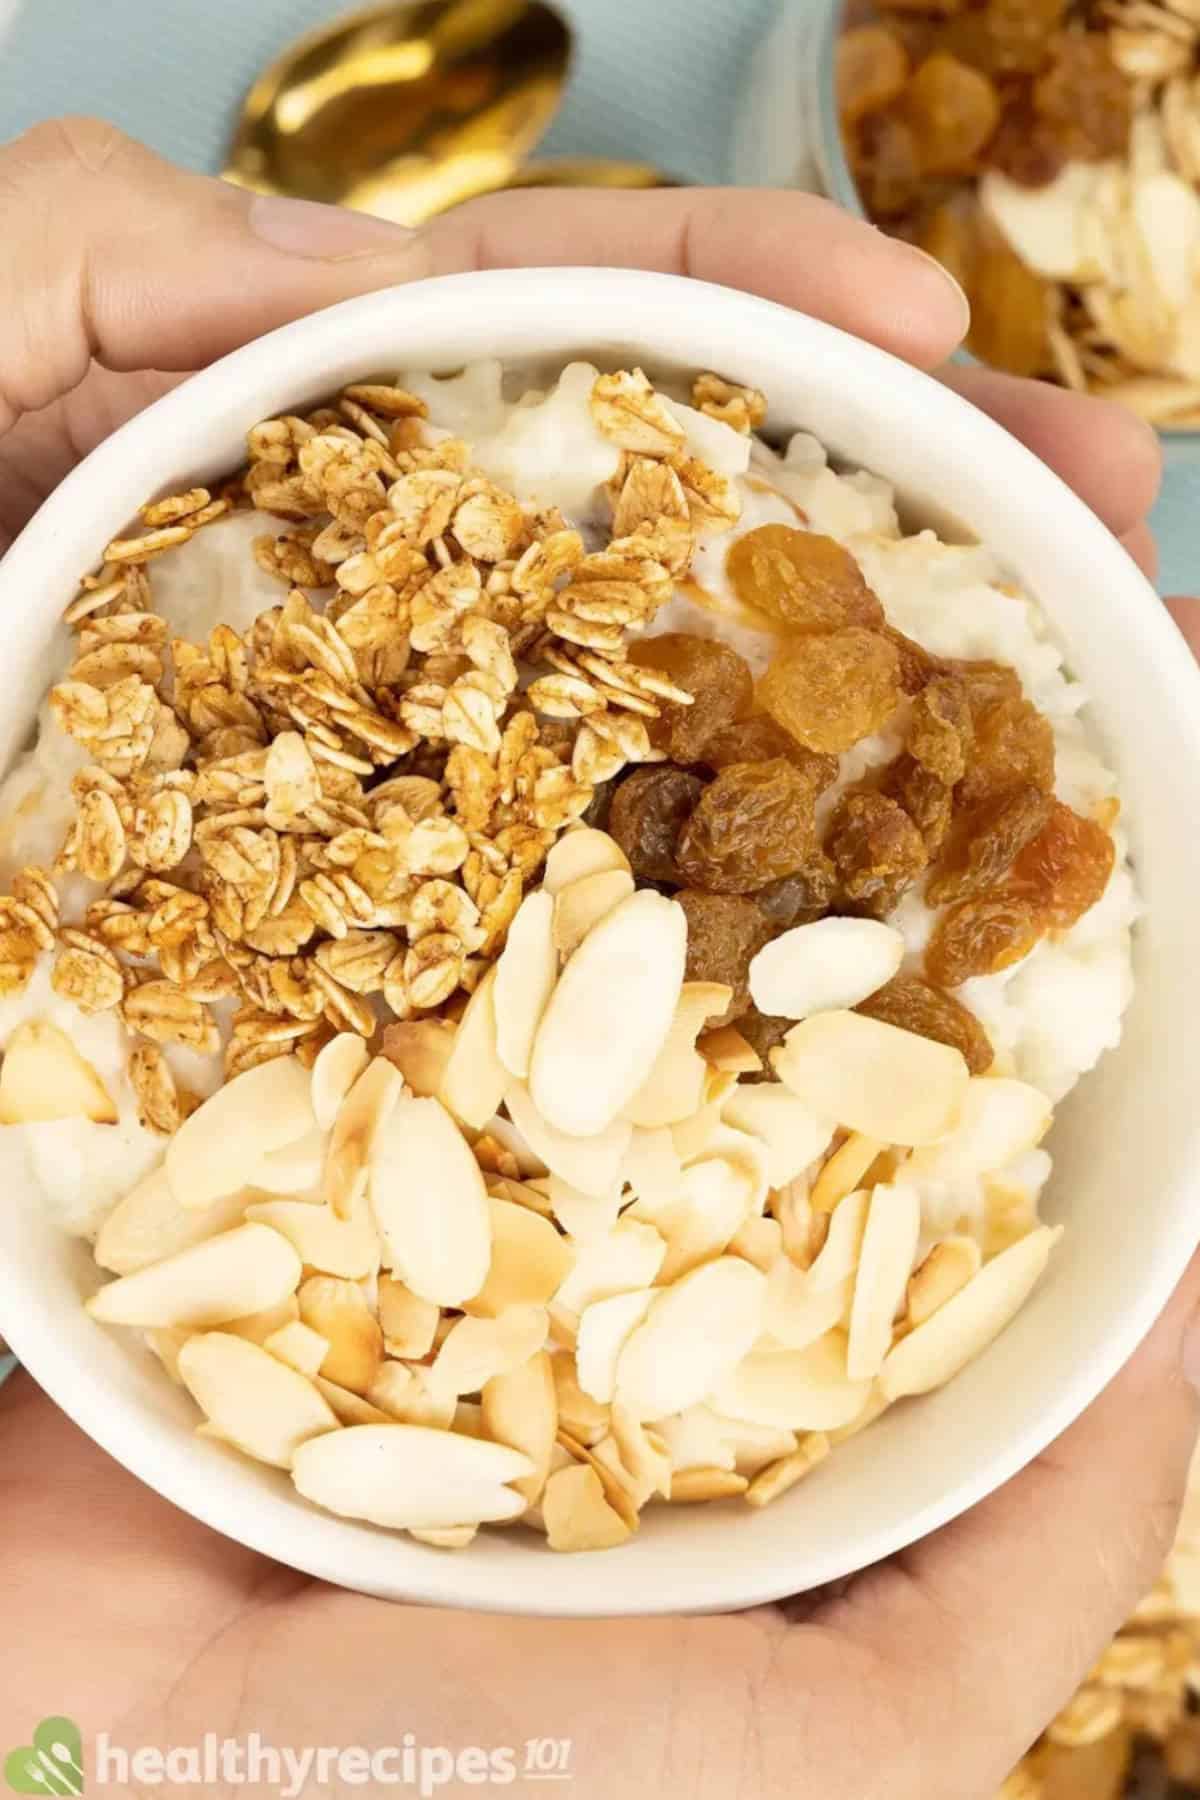 Close up image of rice pudding in a bowl with almonds, oats, and raisins.